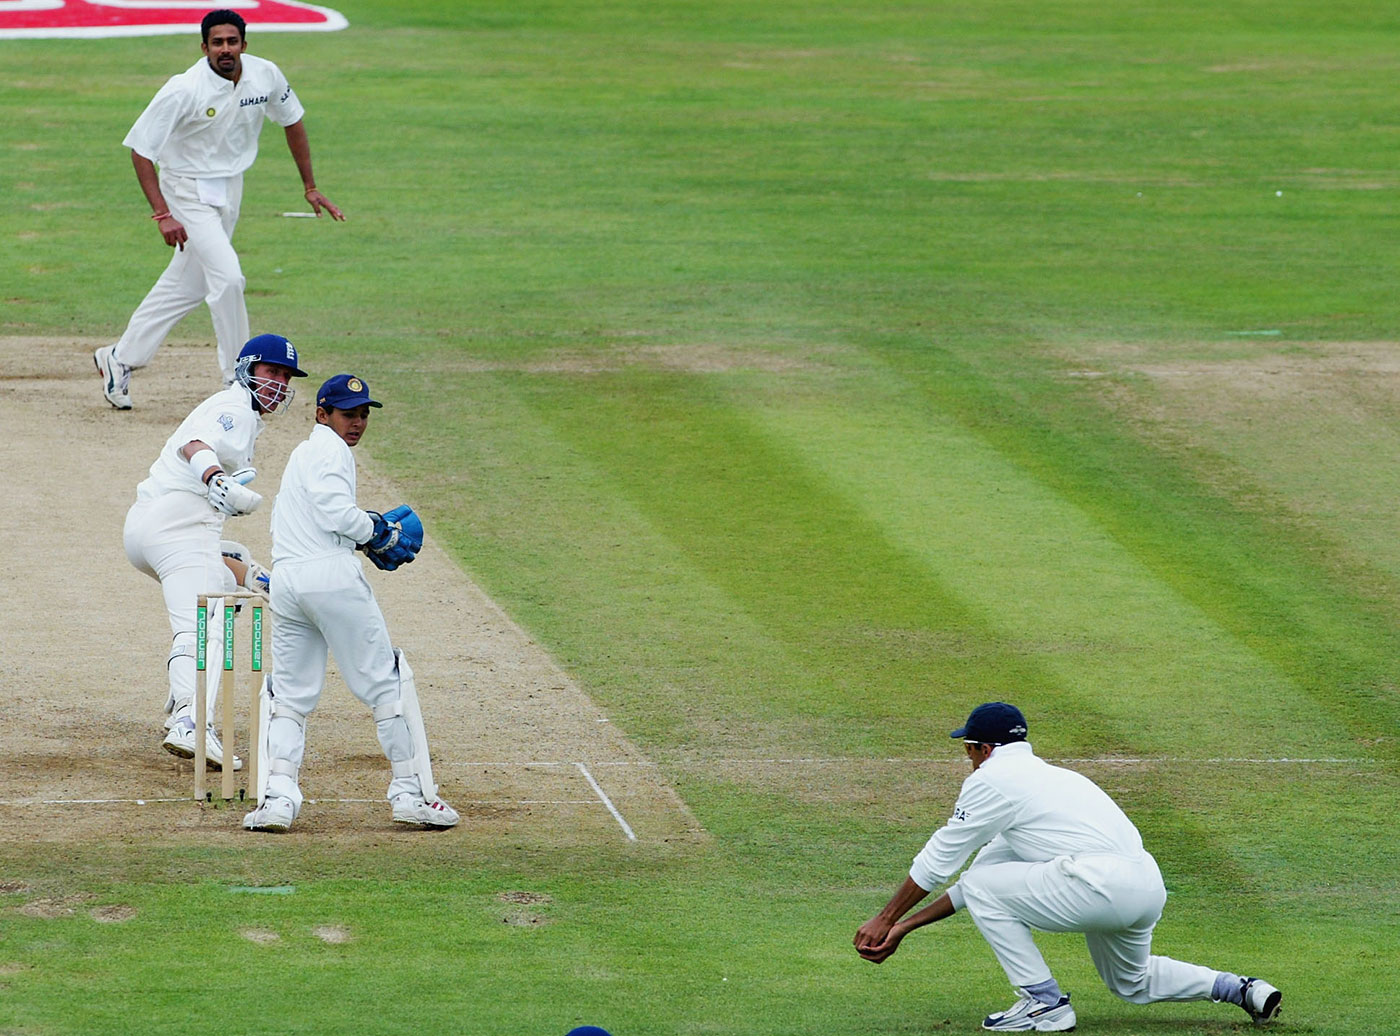 Best victories of Ganguly, Dhoni and Kohli as captains in England